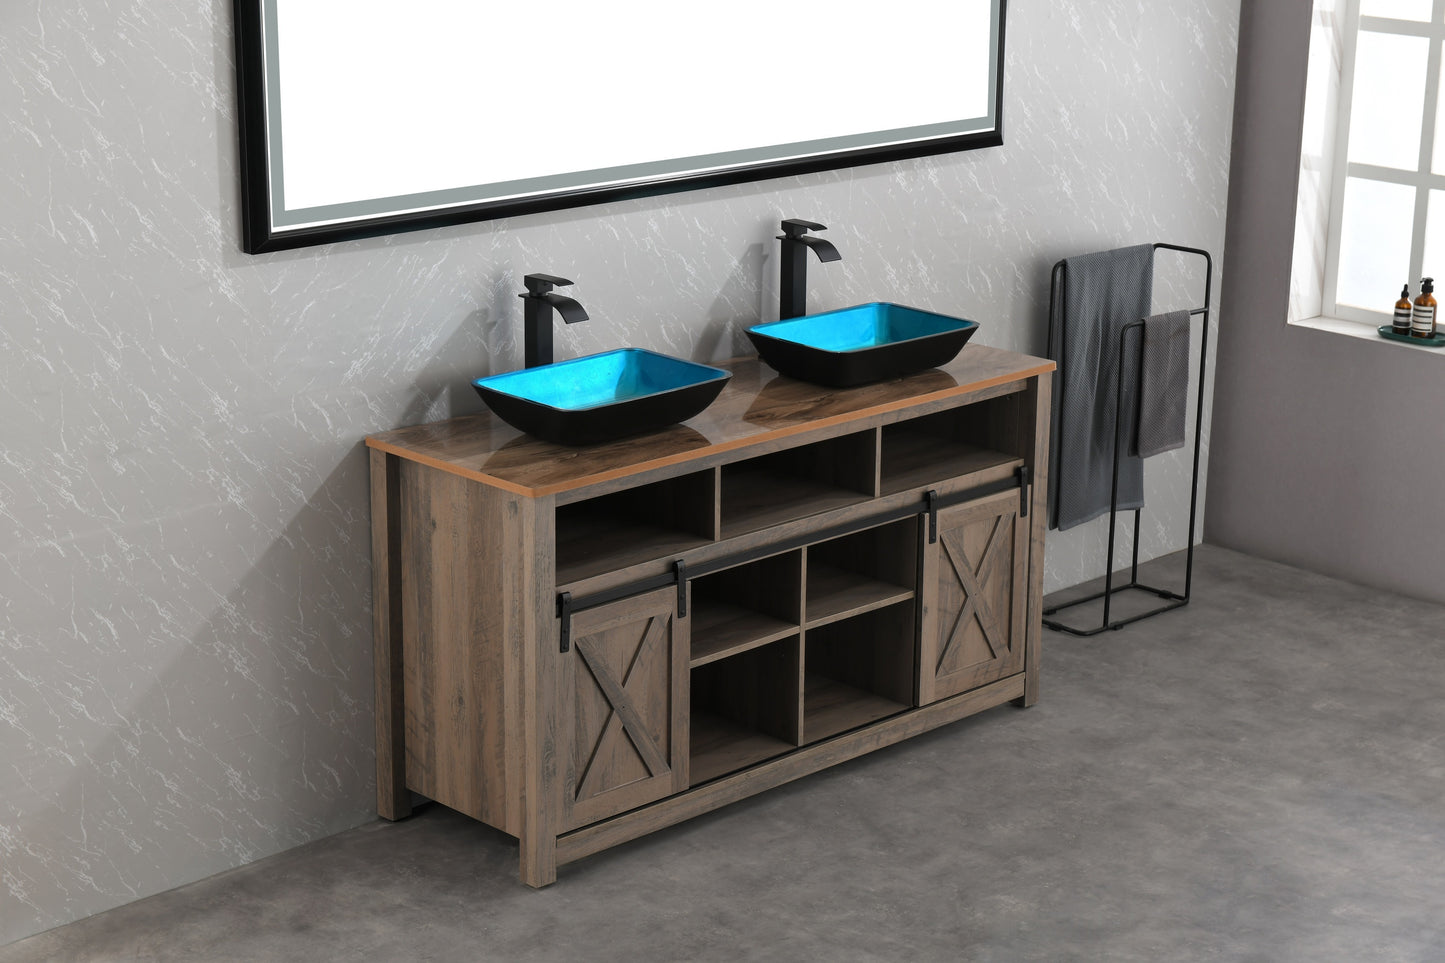 Handcrafted Turquoise Glass Vessel Bathroom Sink Set with Matte Black Faucet and Drain